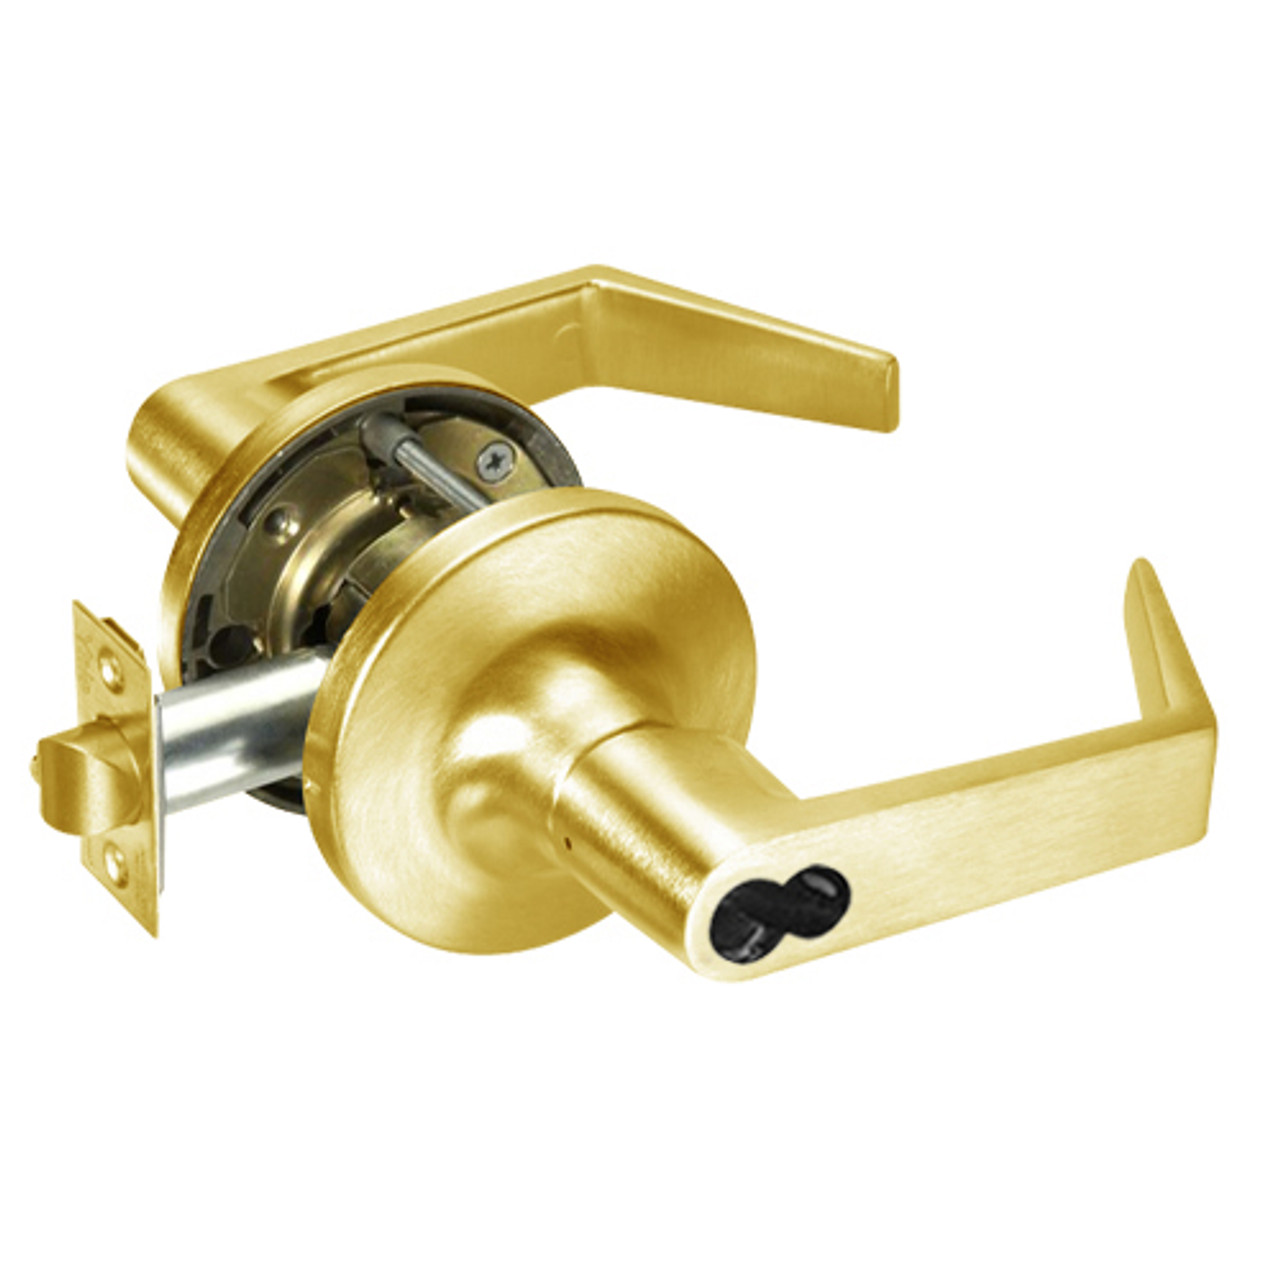 M-AU5417LN-605 Yale 5400LN Series Double Cylinder Apartment or Exit Cylindrical Locks with Augusta Lever Prepped for Medeco-ASSA IC Core in Bright Brass